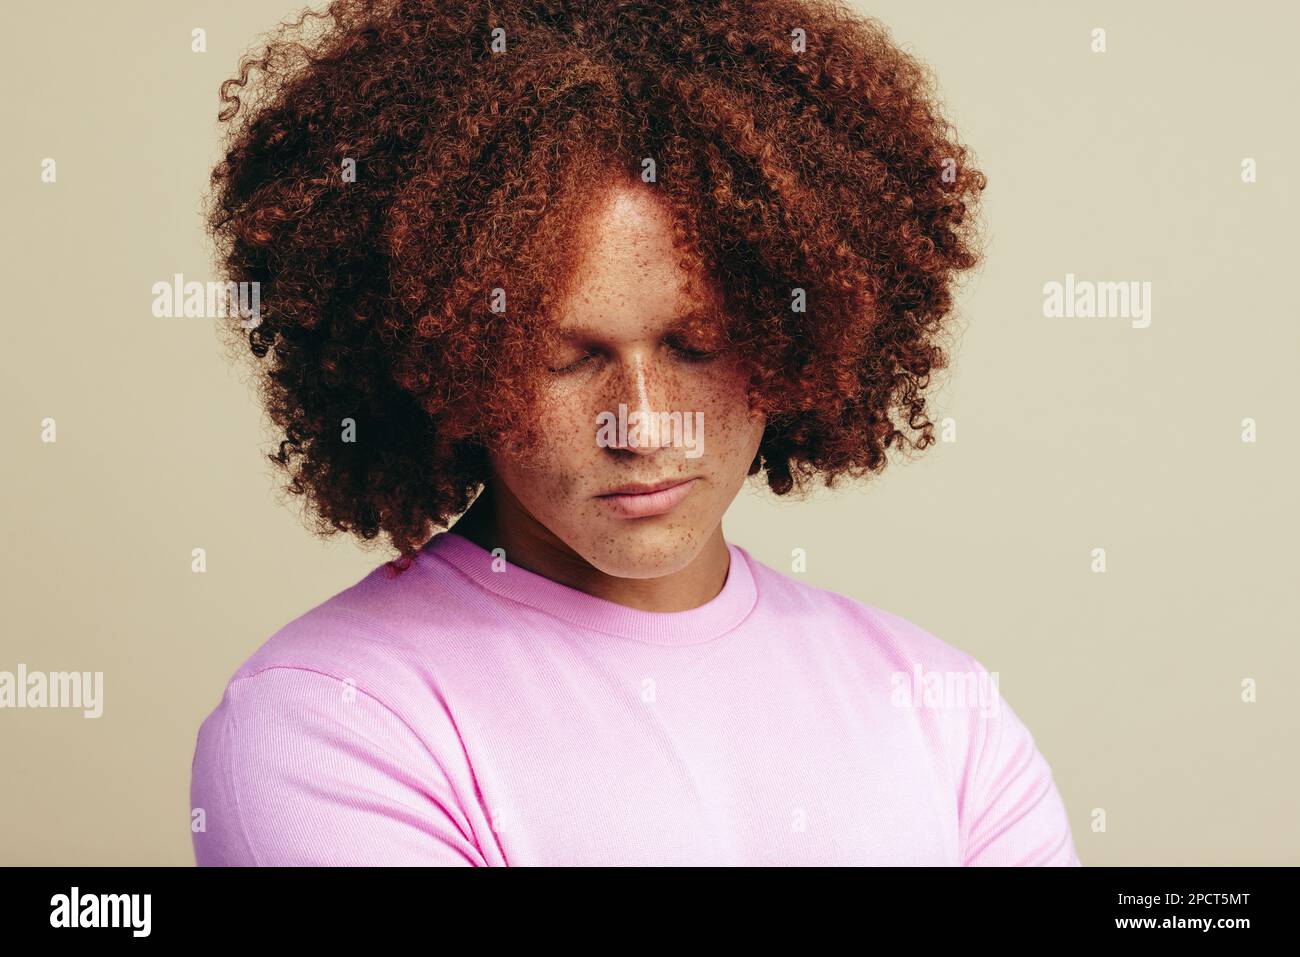 Man with red hair and freckles on his face stands in a studio, radiating self-confidence and self-acceptance. Youthful and handsome man embracing his Stock Photo